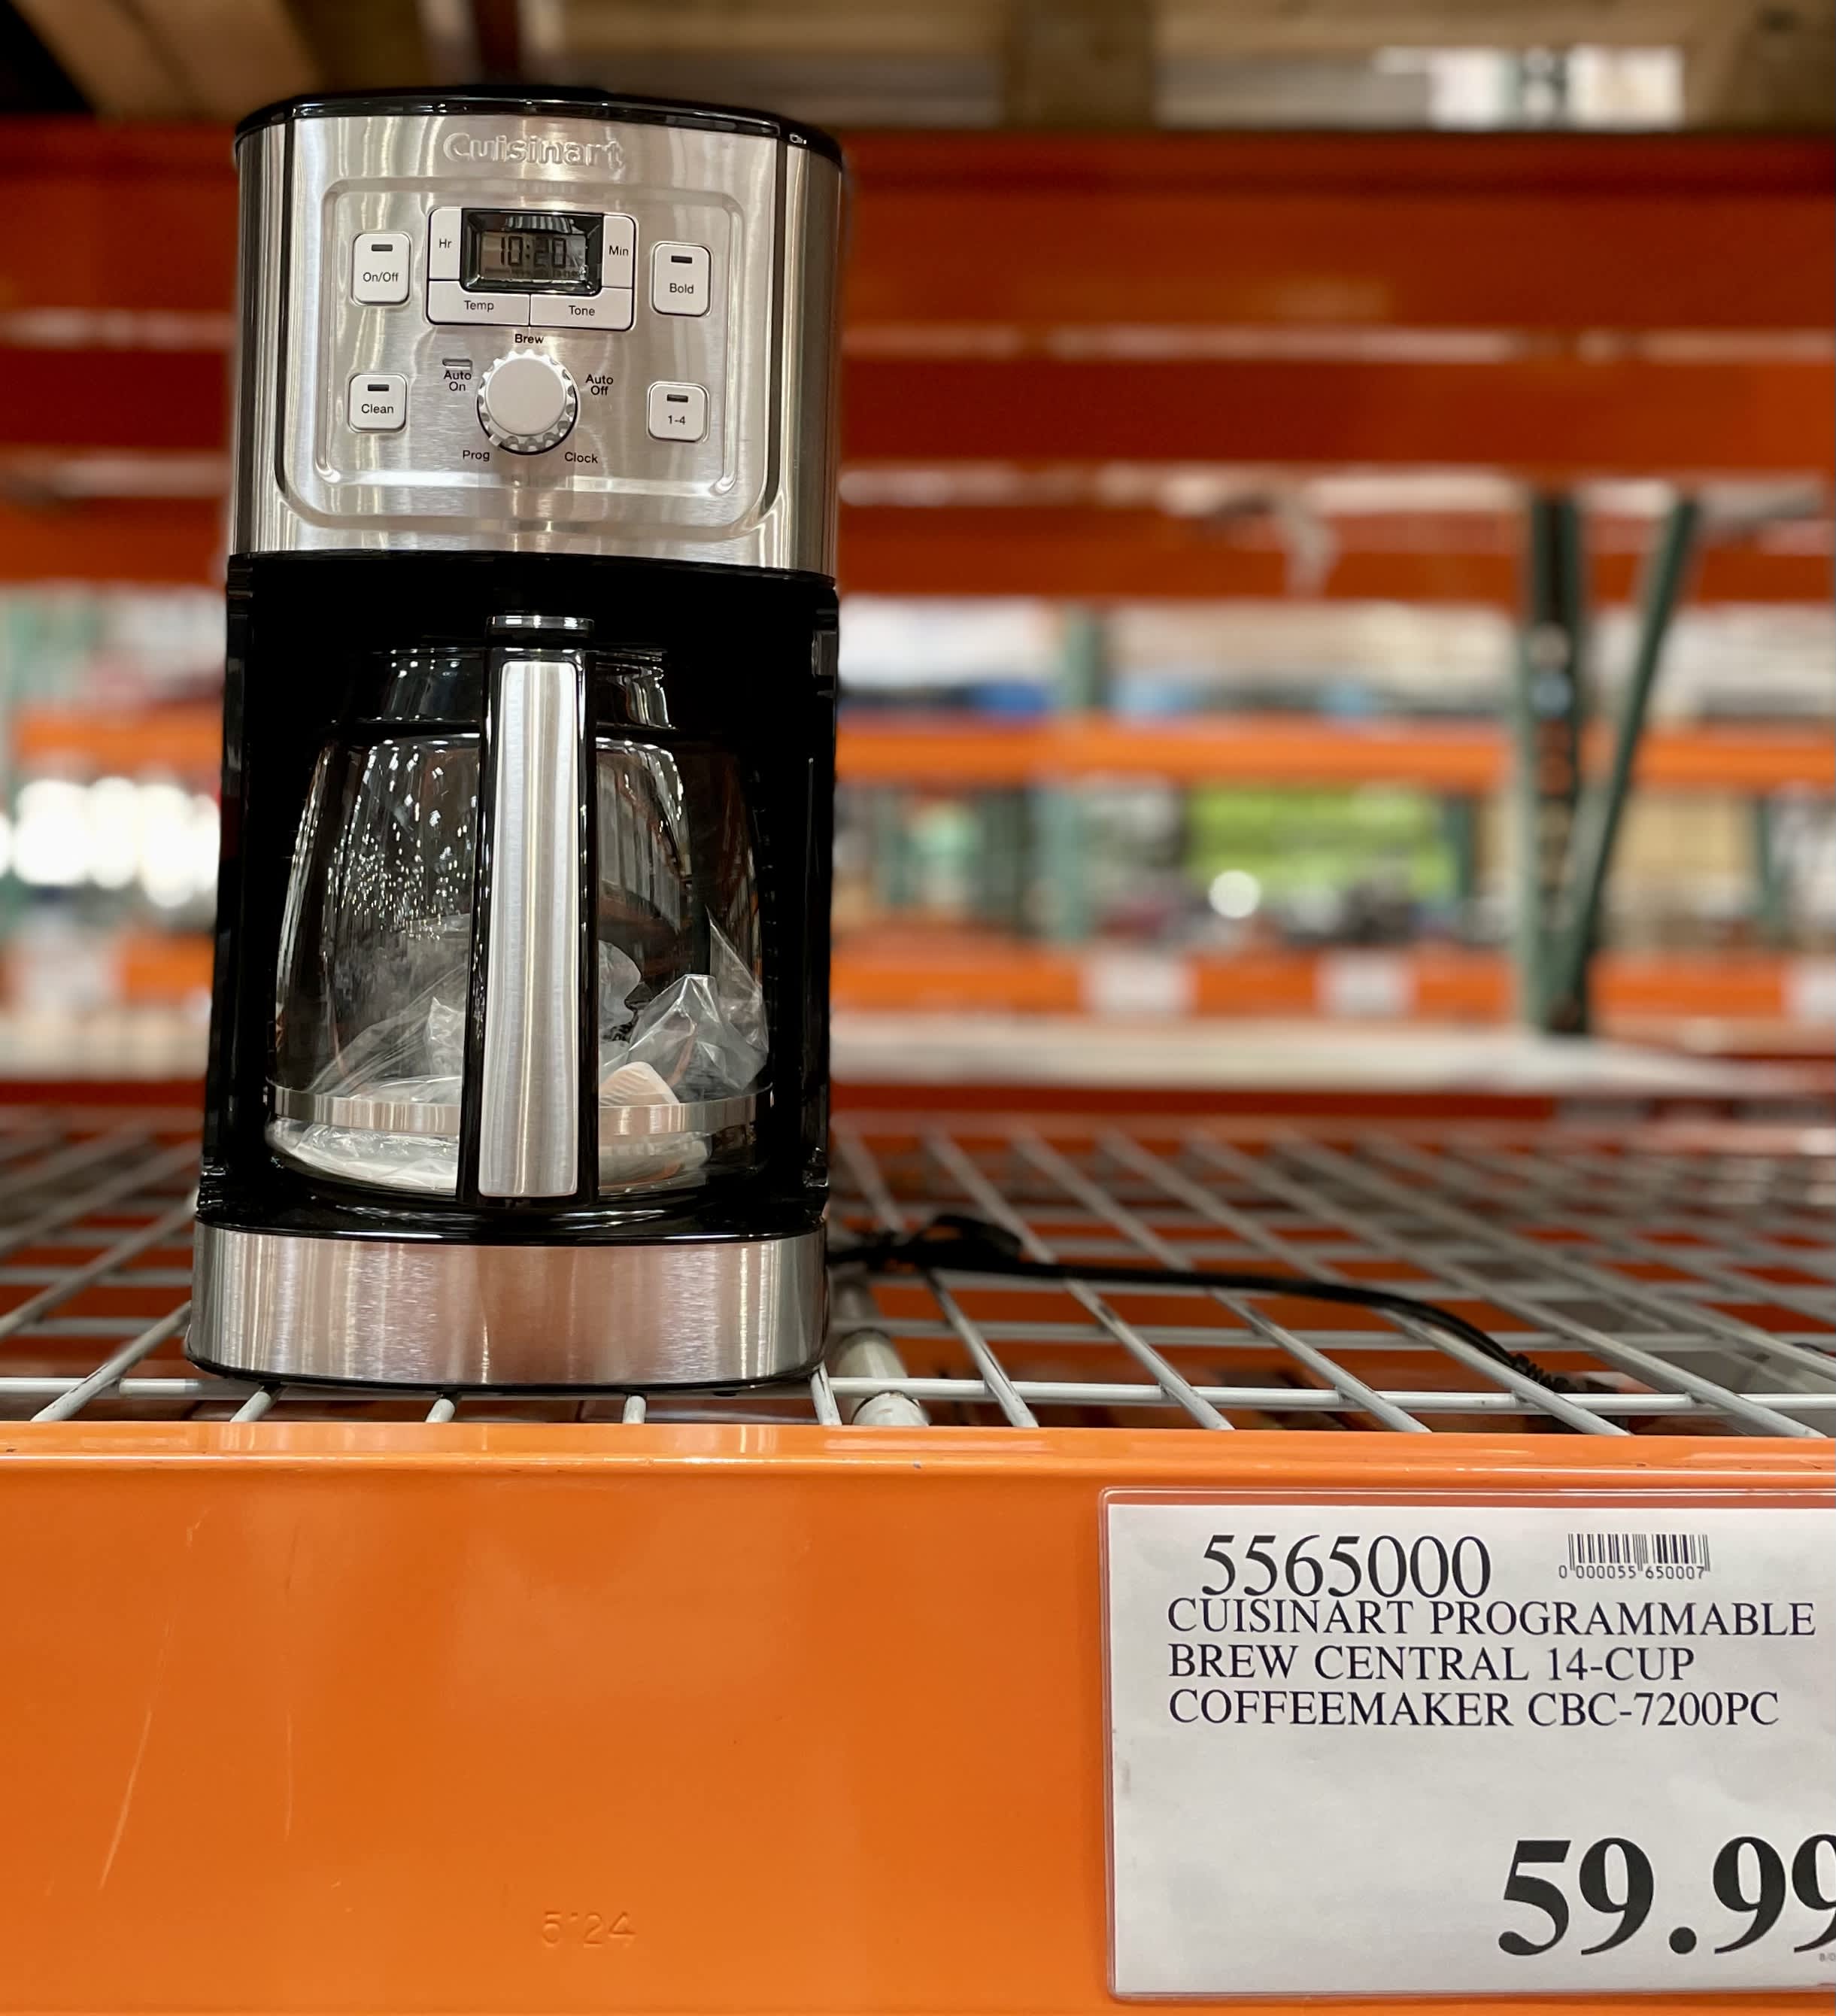 15 Kitchen Appliances and Gadgets to Always Buy at Costco